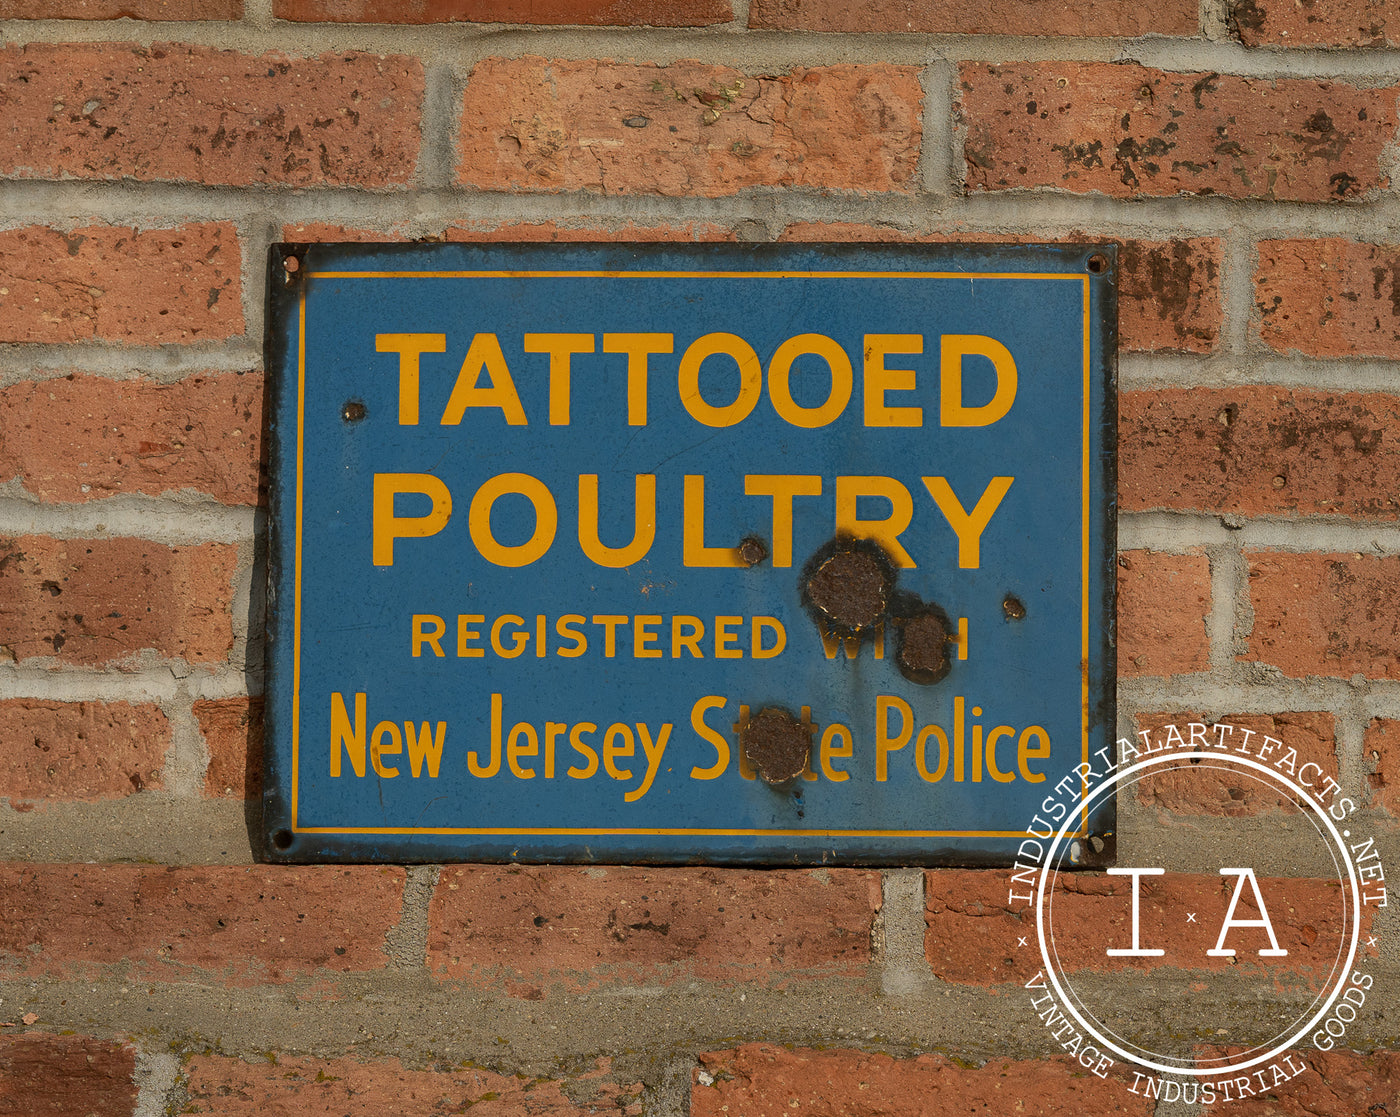 Porcelain Tattooed Poultry Advertising Sign